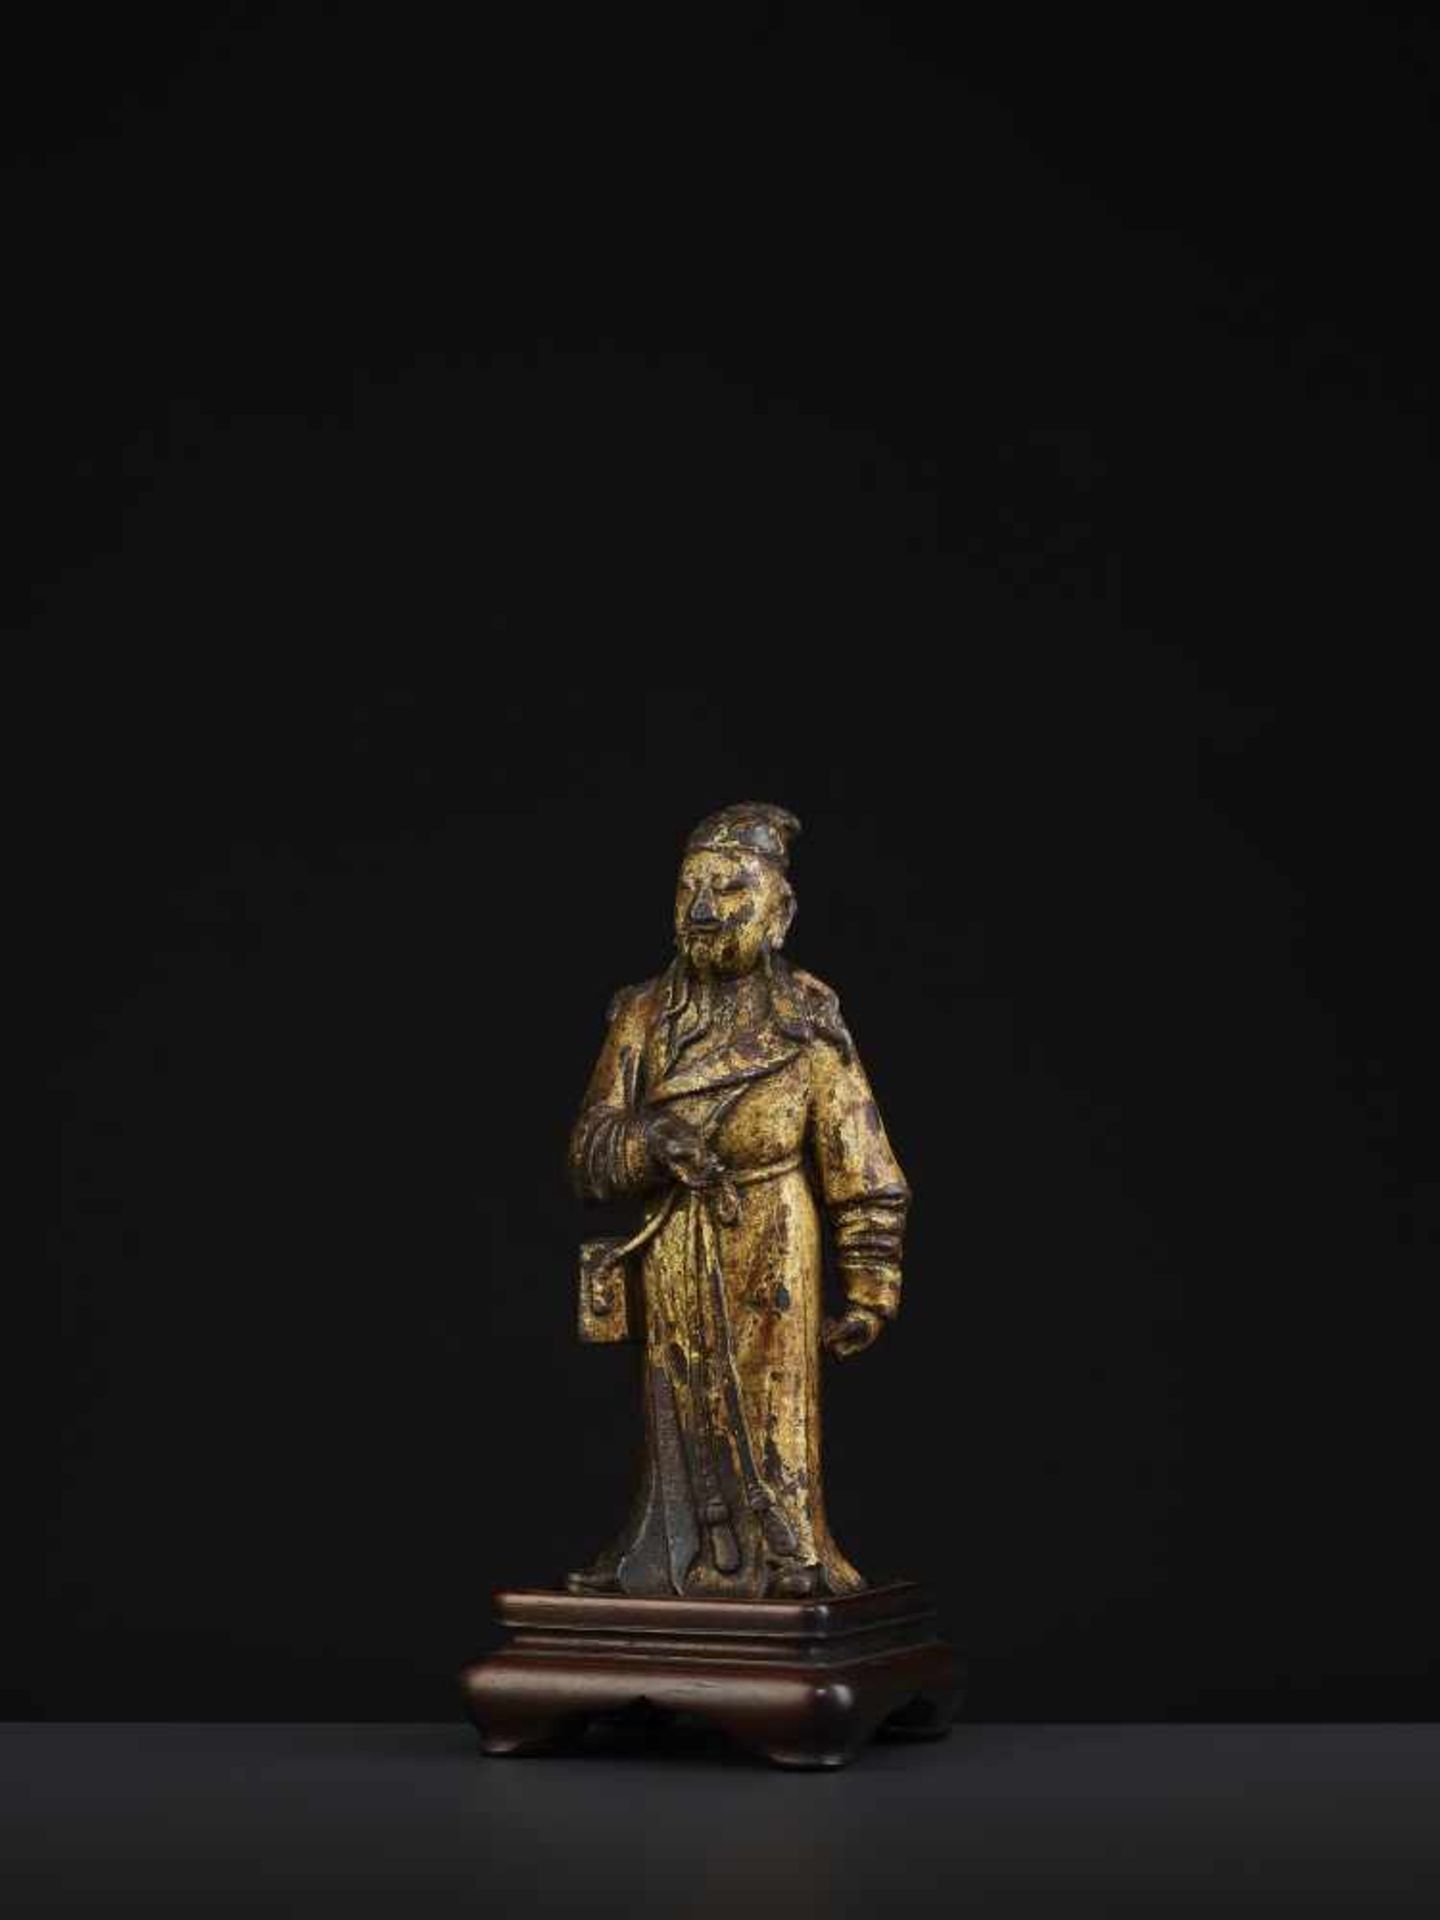 A MING DAOIST IMMORTAL BRONZEChina 16th - 17th century. The bronze with a rich gold lacquer coating. - Image 10 of 10